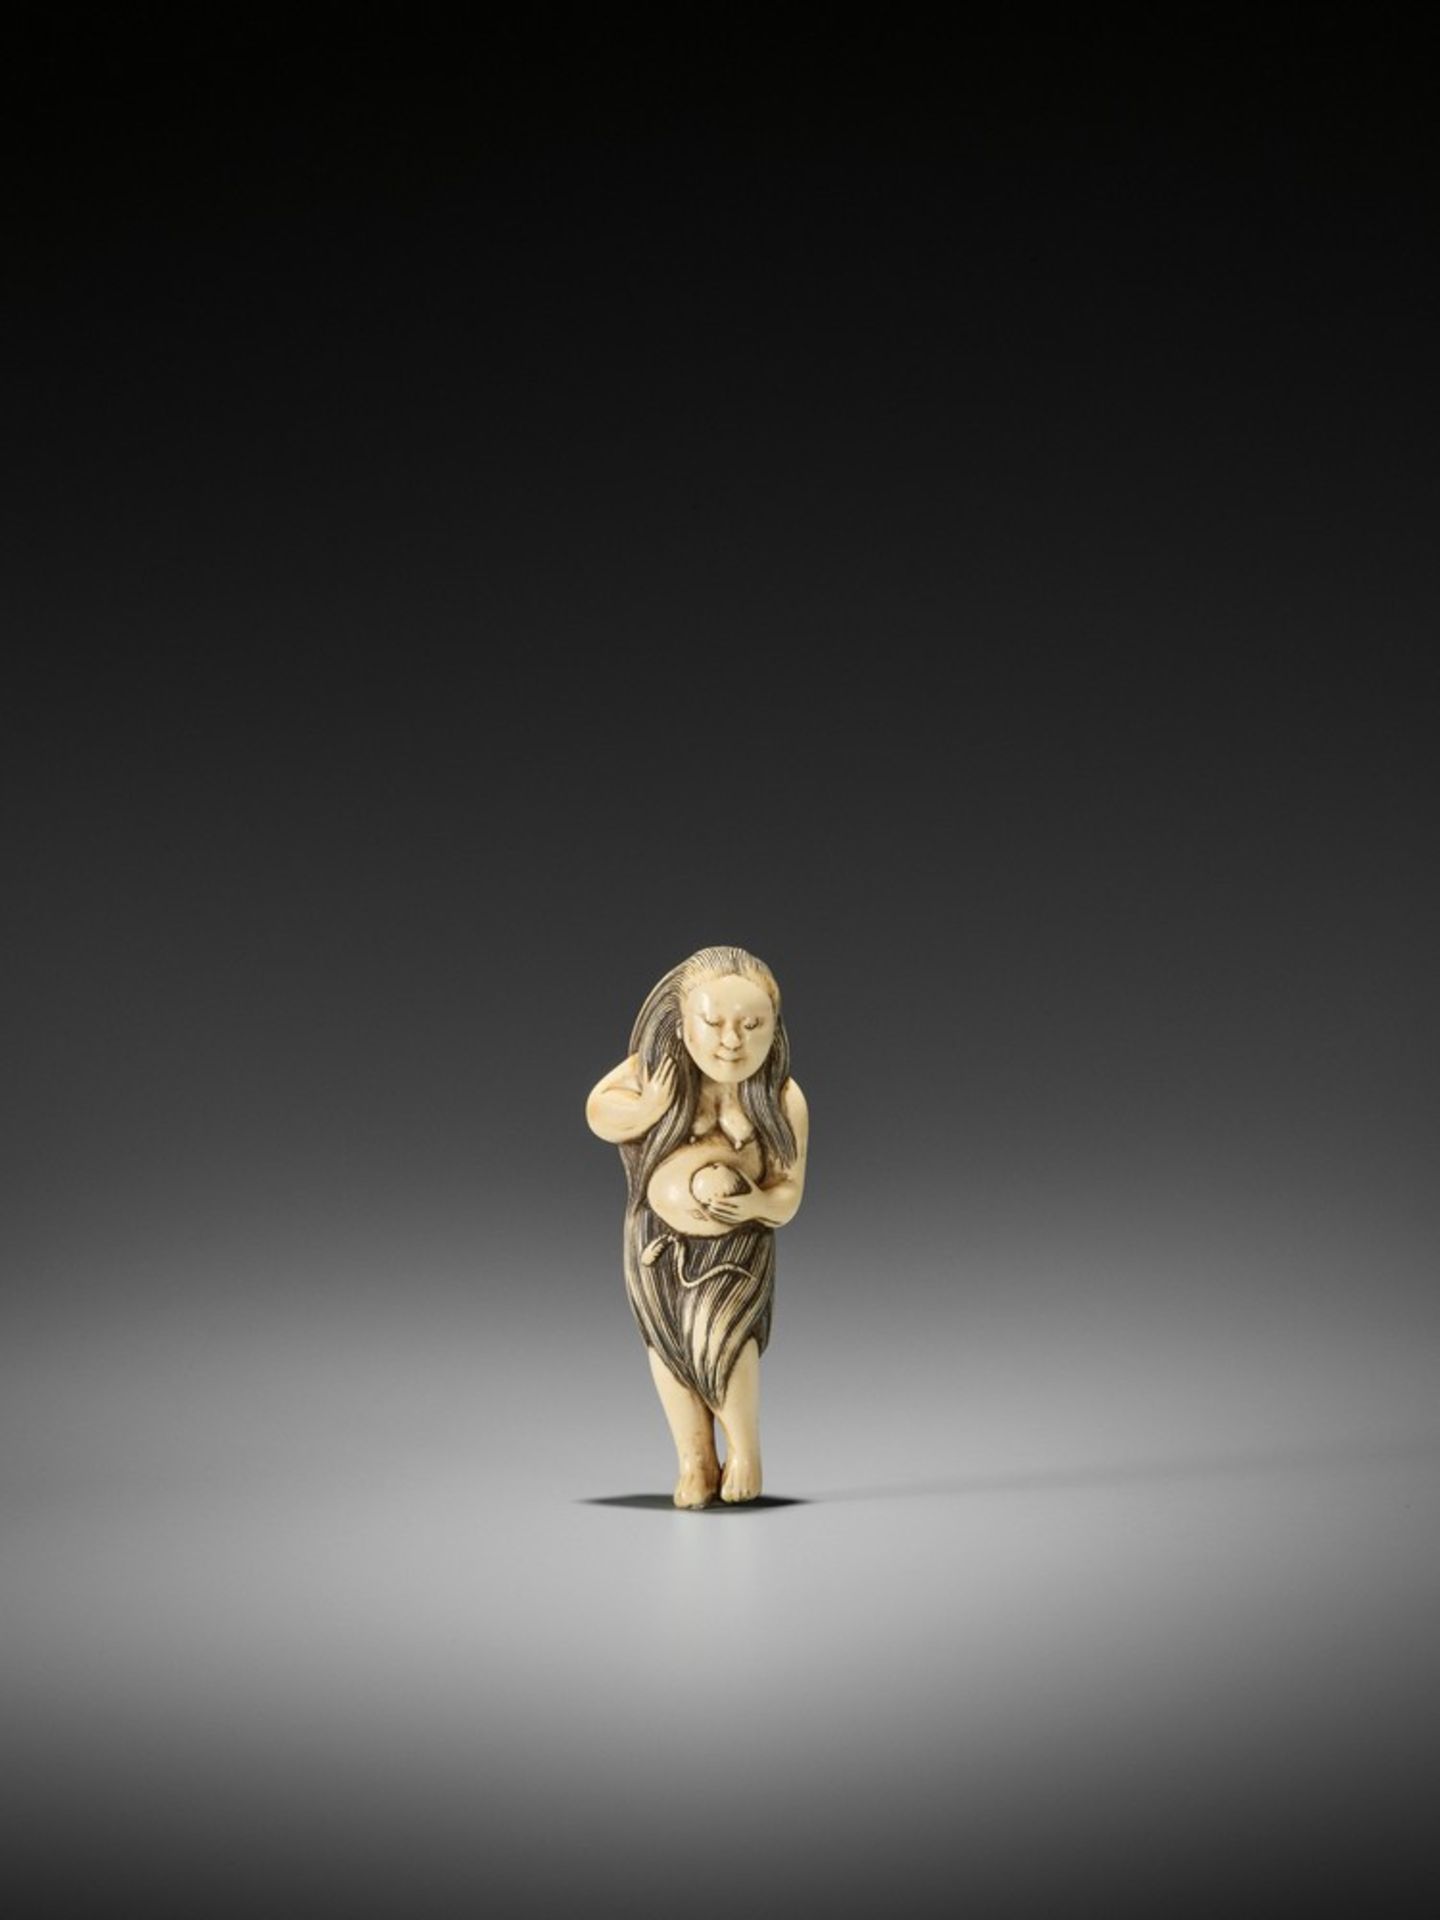 AN EXQUISITE IVORY NETSUKE OF A DIVING GIRL (AMA) UnsignedJapan, 18th century, Edo period (1615- - Image 4 of 8